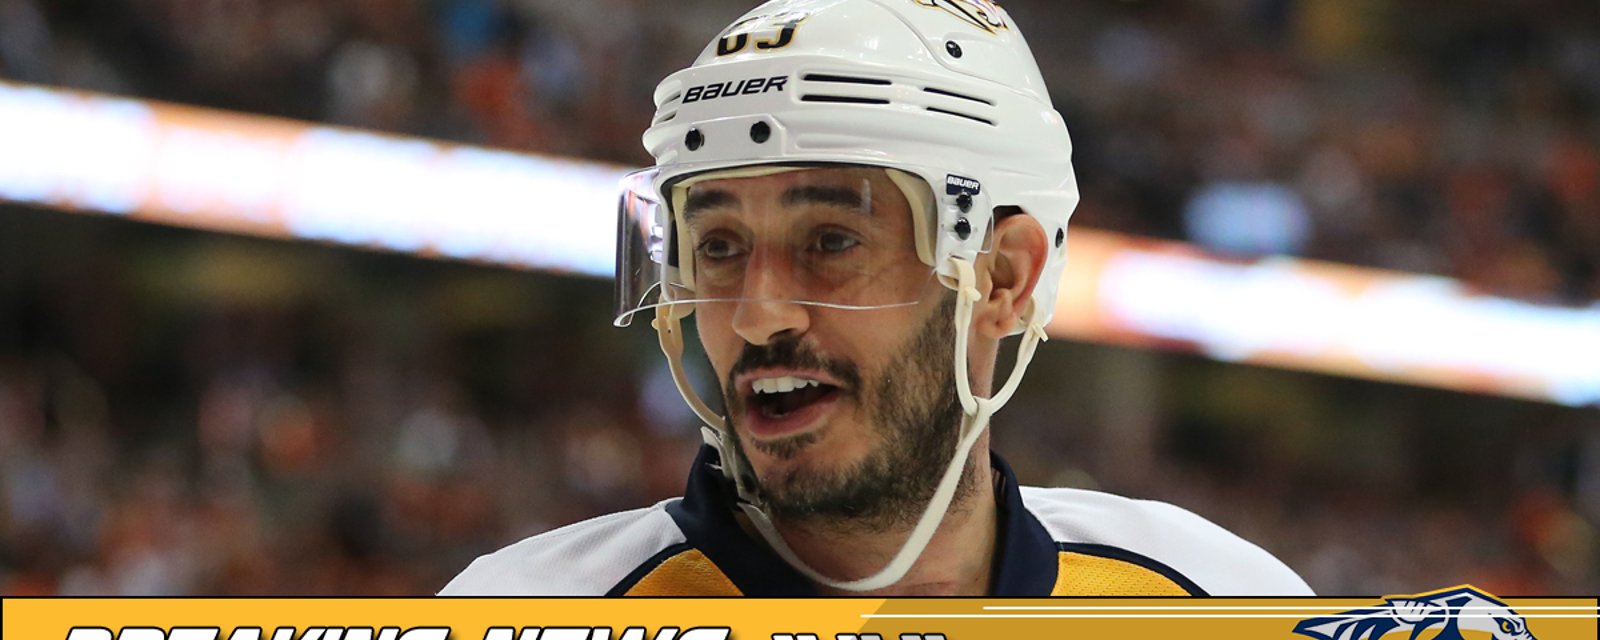 BREAKING: Mike Ribeiro’s career may be over due to alcohol relapse.